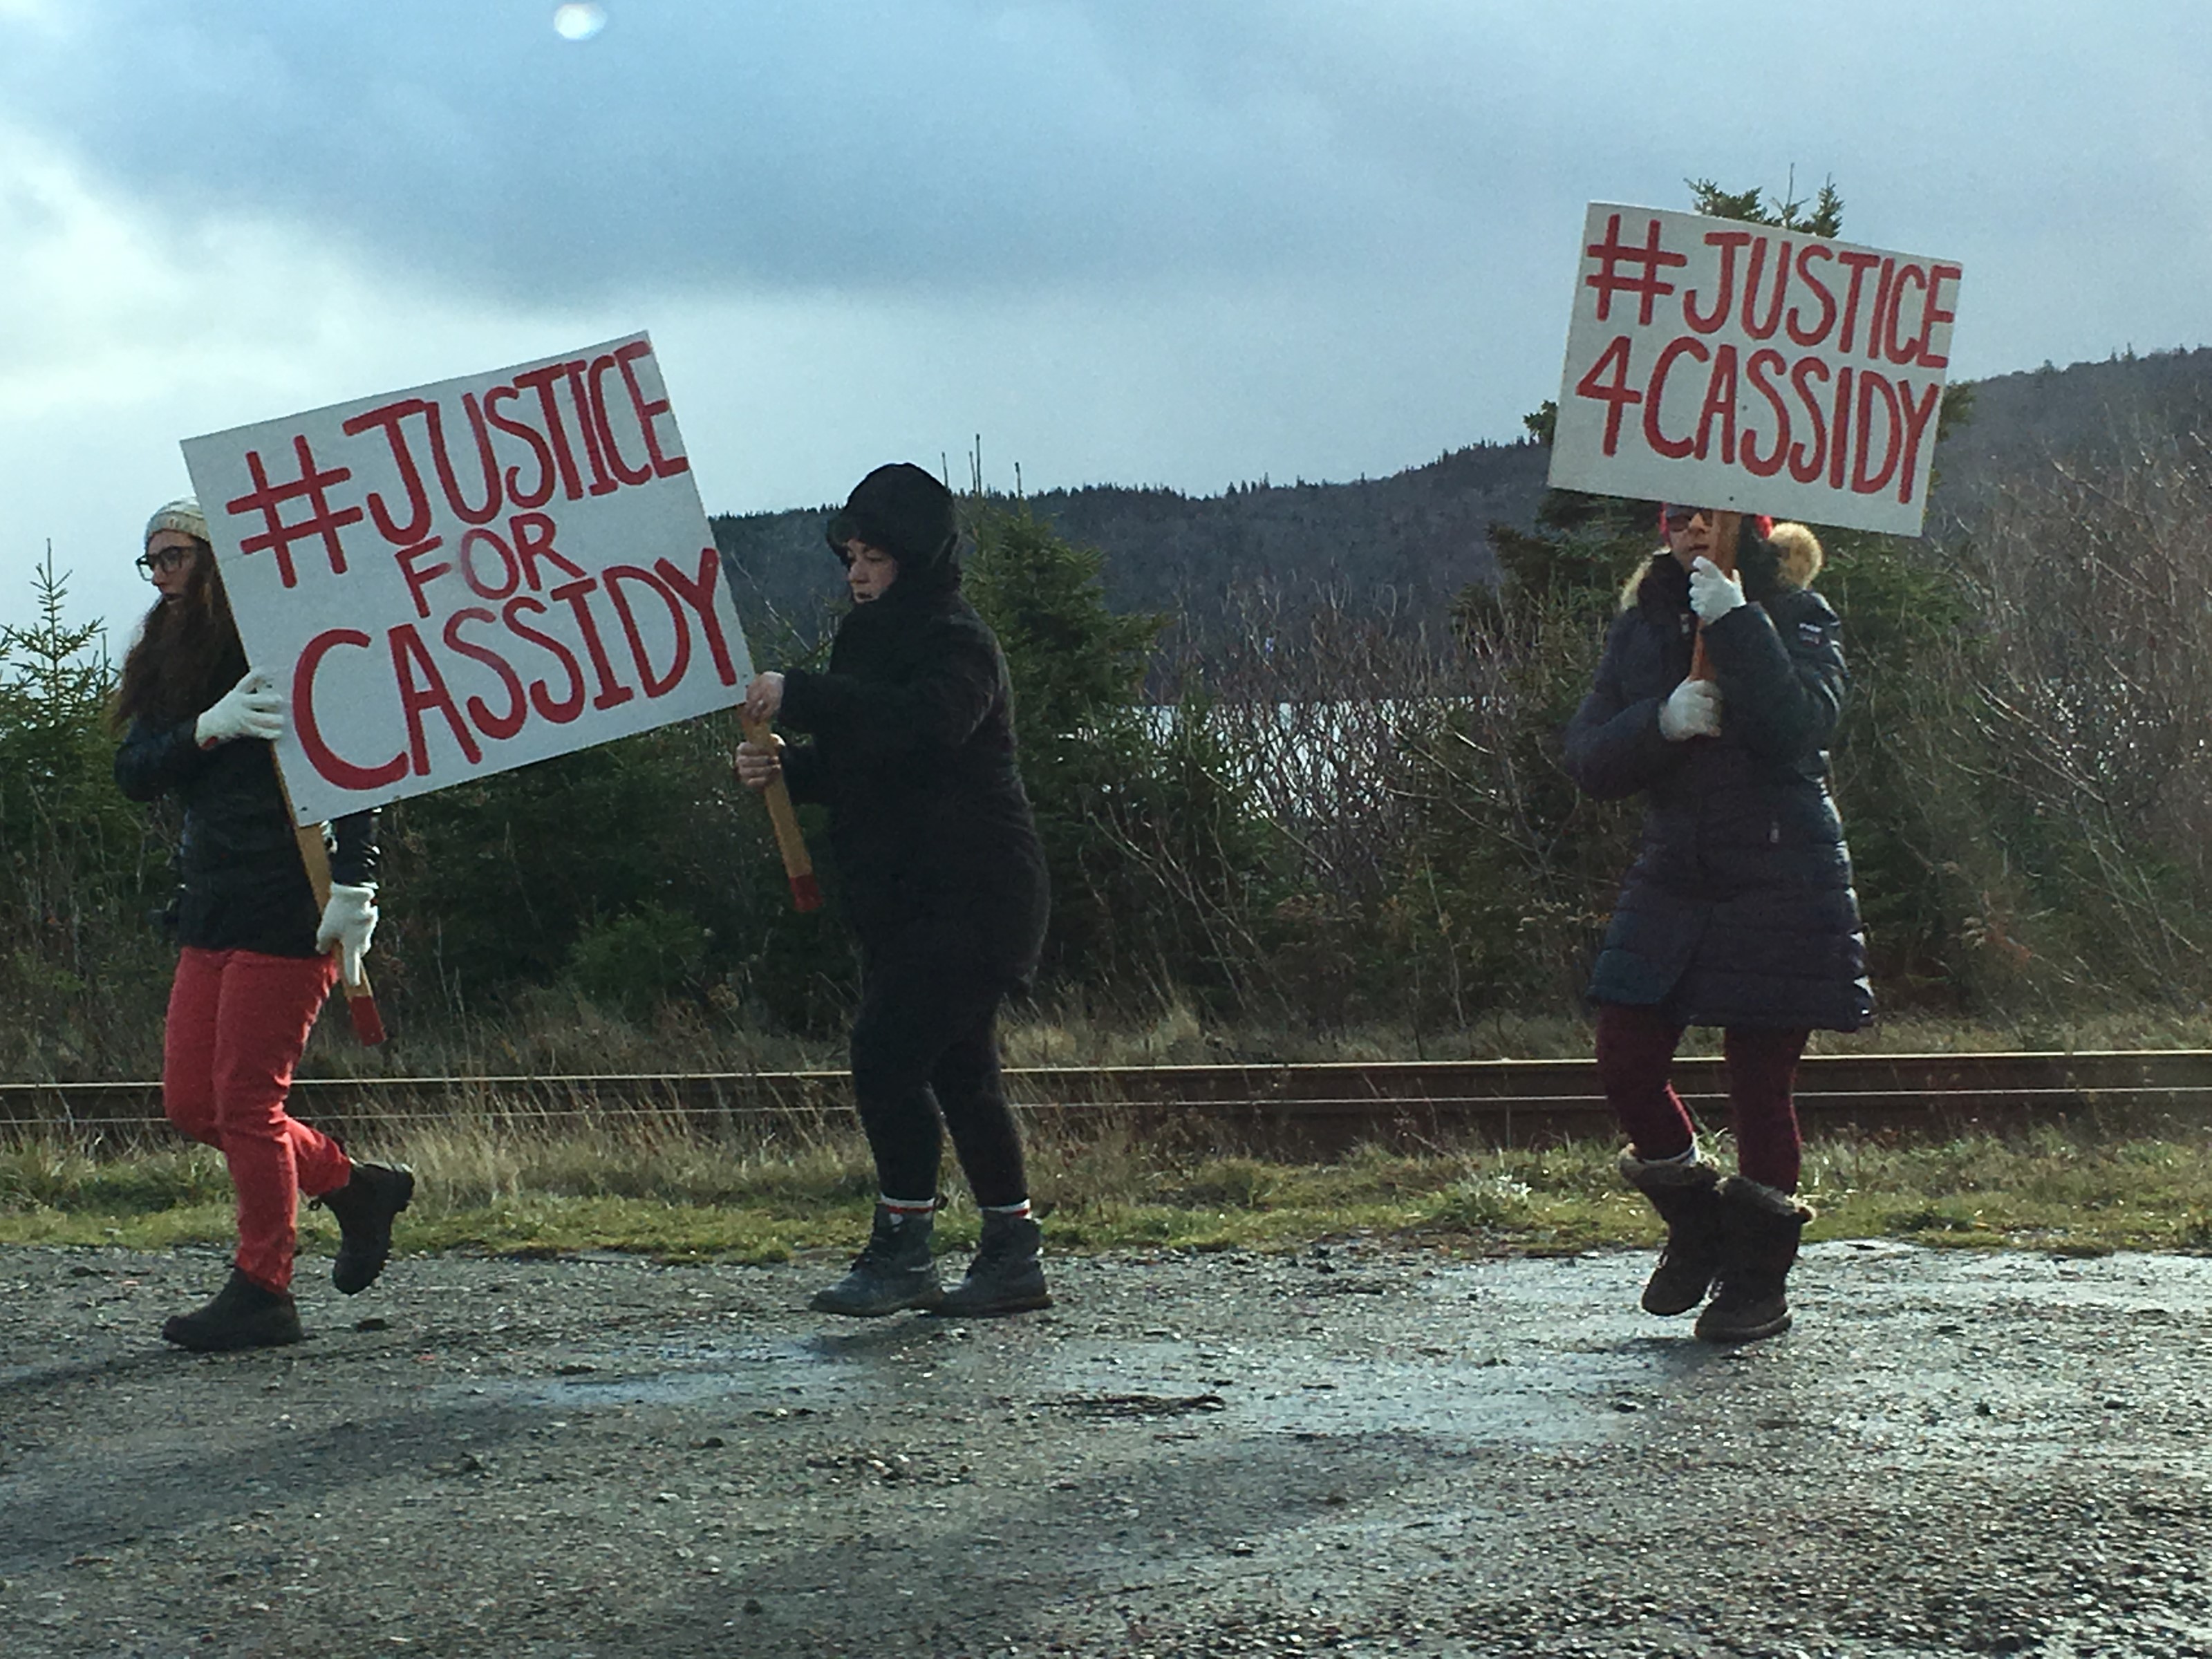 Cassidy justice for 'One of